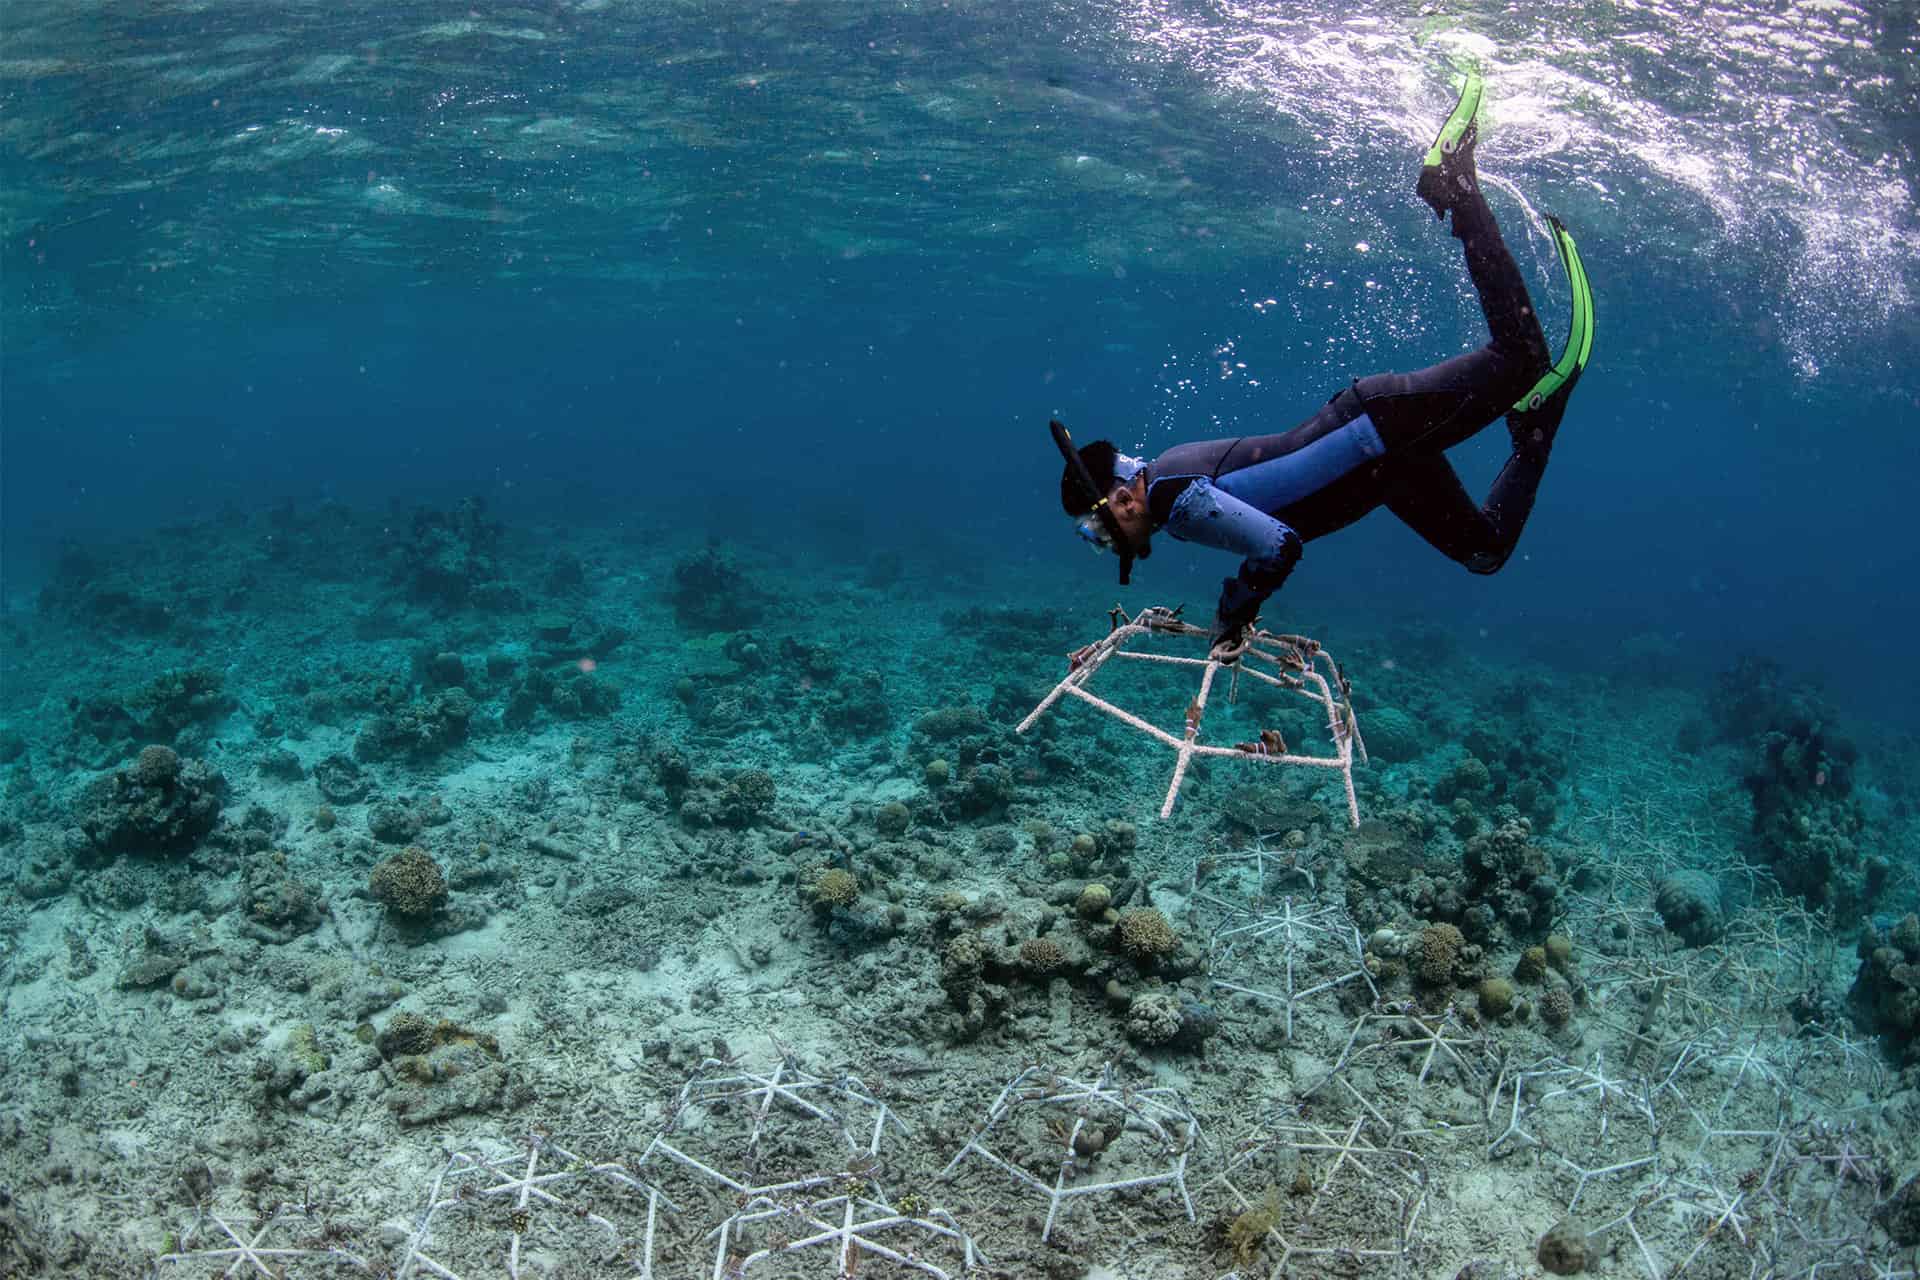 New Method Fully Recovers Coral Reefs Destroyed By Blast Fishing